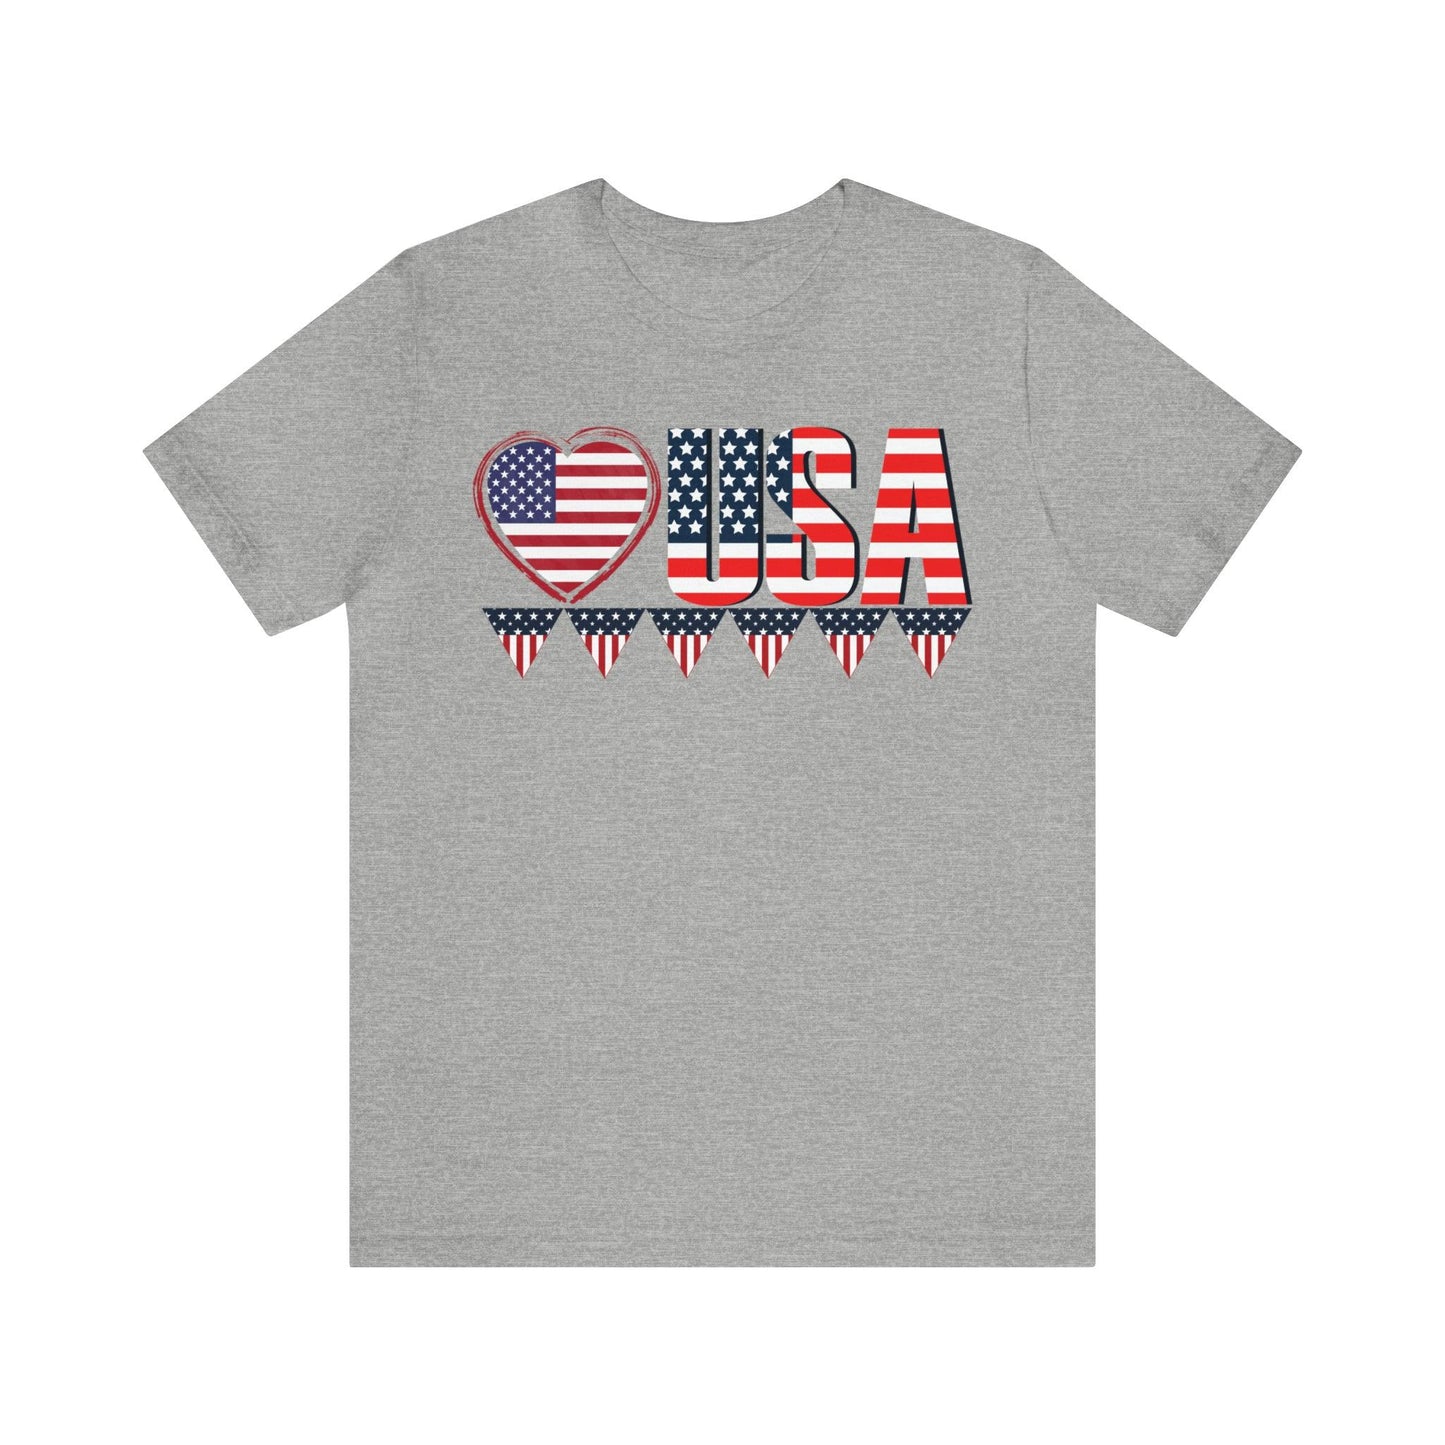 Love USA American flag shirt, Red, white, and blue shirt, 4th of July shirt - Giftsmojo